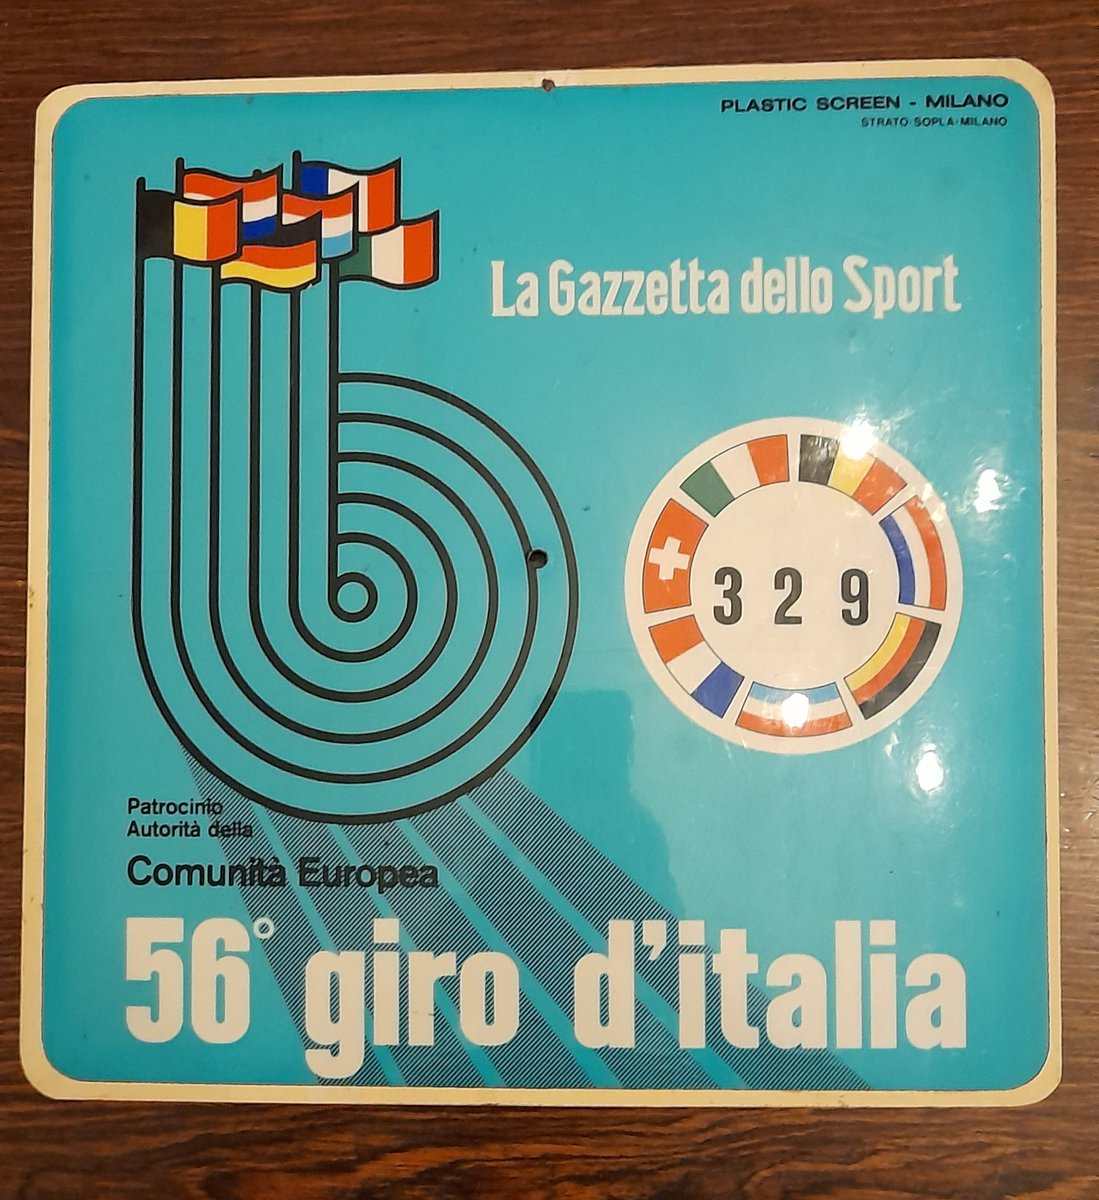 Car accreditation plate from the 1973 Giro. It began in Merckx' Belgium, and passed through the member states of the EEC. Moreover Eddy, who had declared he was riding the Vuelta, received a knighthood in Rome. Thus he was persuaded to ride the Giro in preference to the Tour.